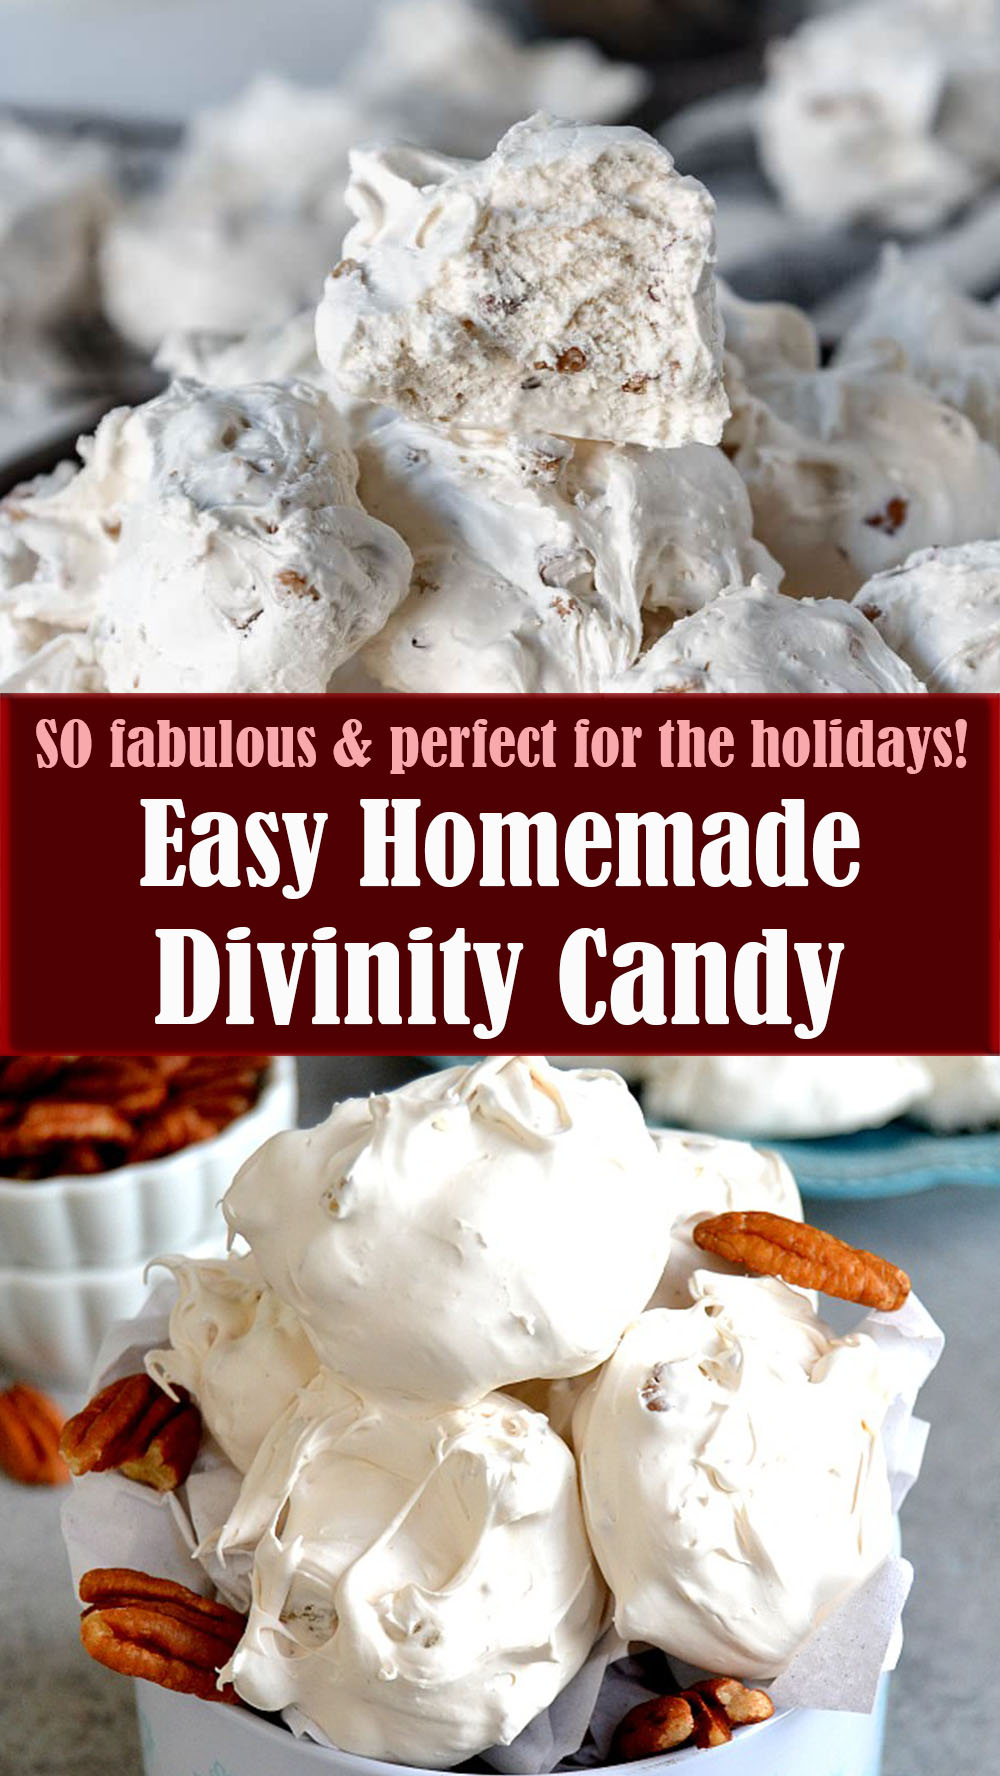 Easy Homemade Divinity Candy